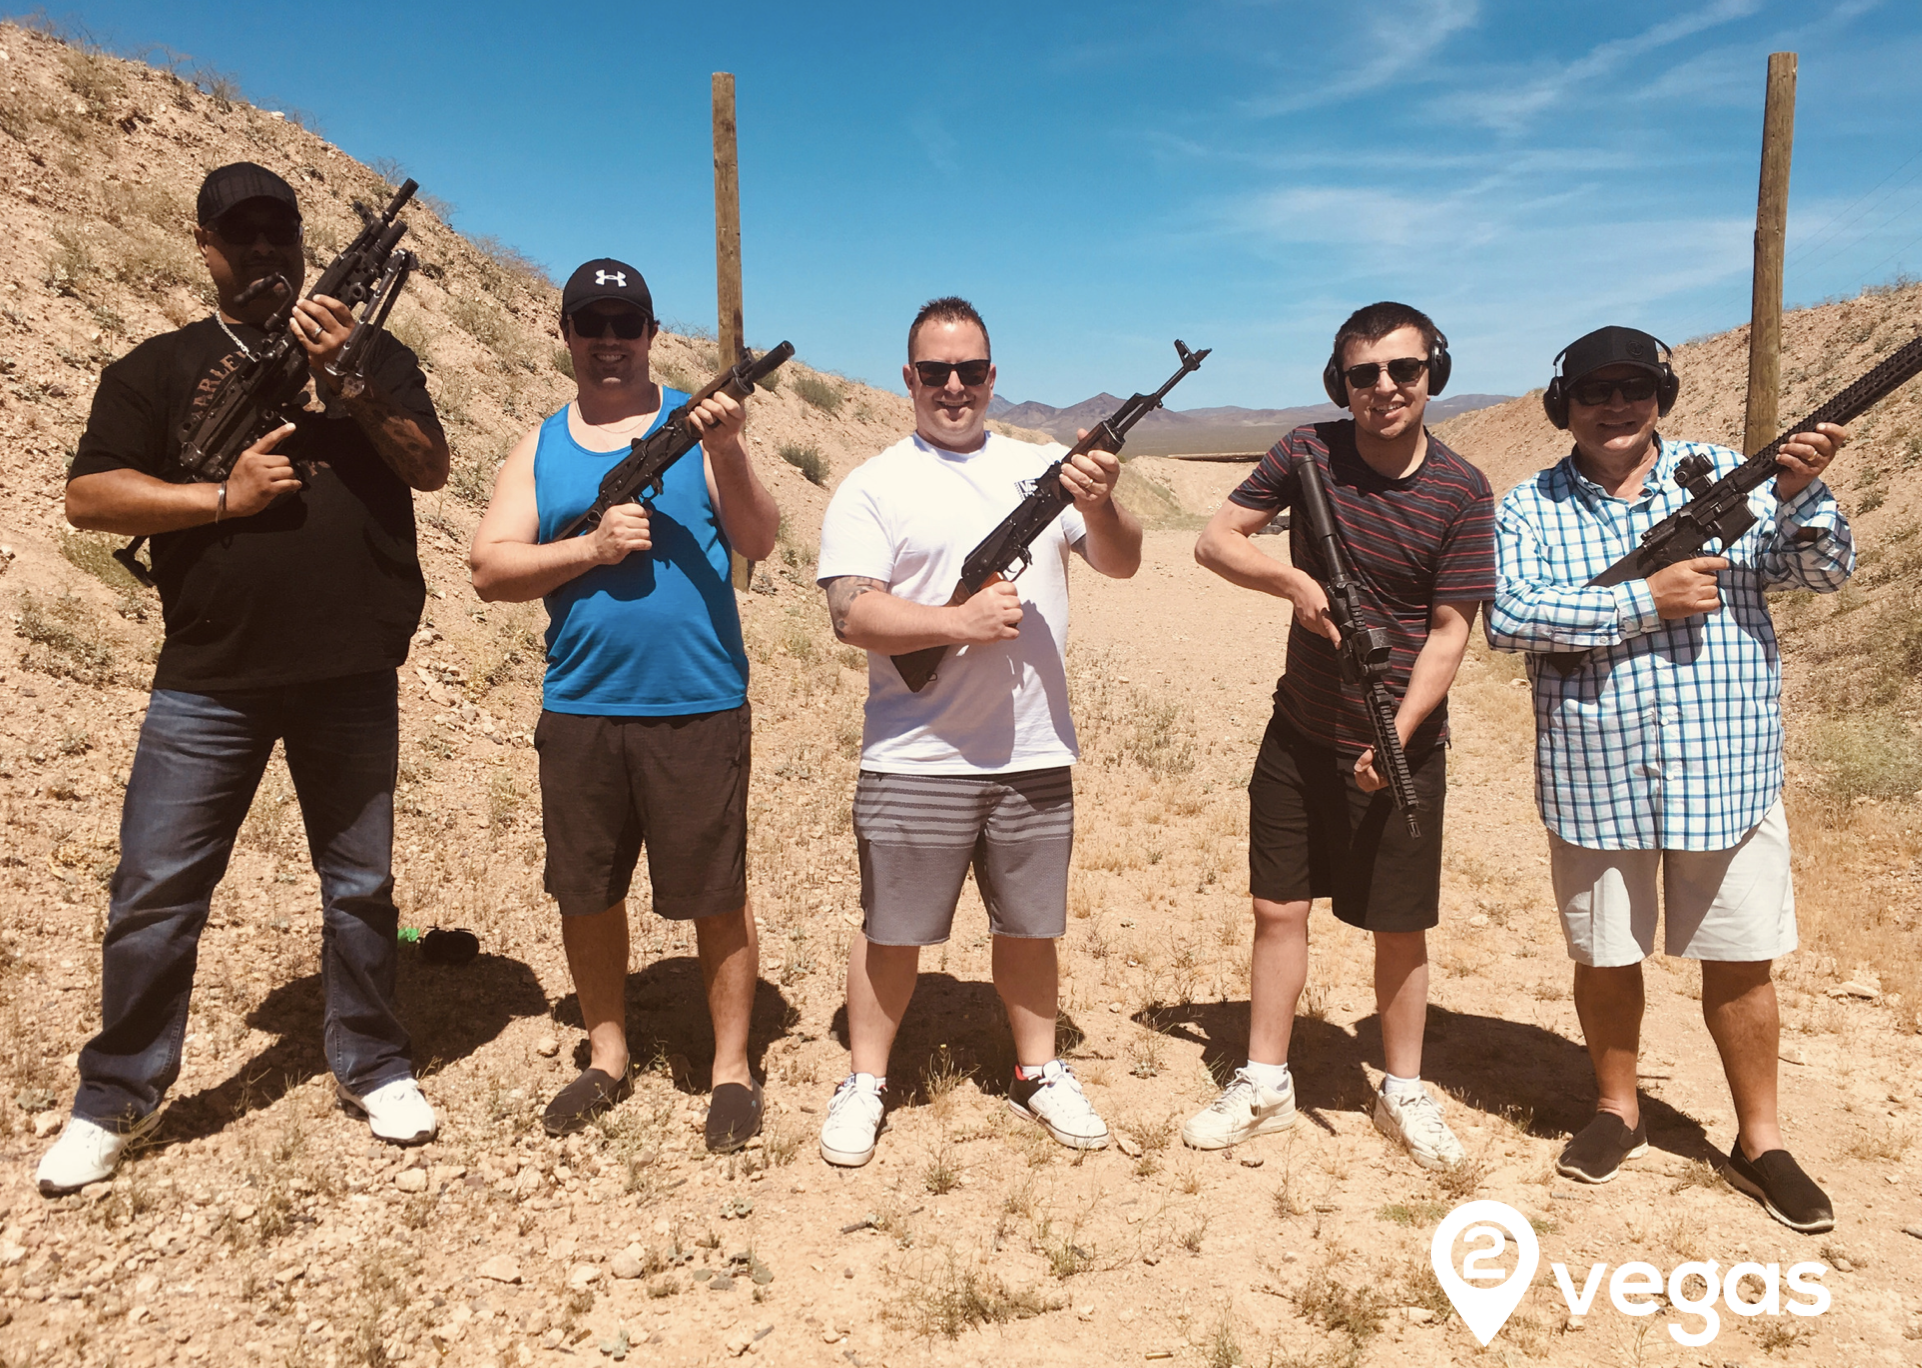 Another Awesome Bachelor Party Desert Shooting with Team 2Vegas.com